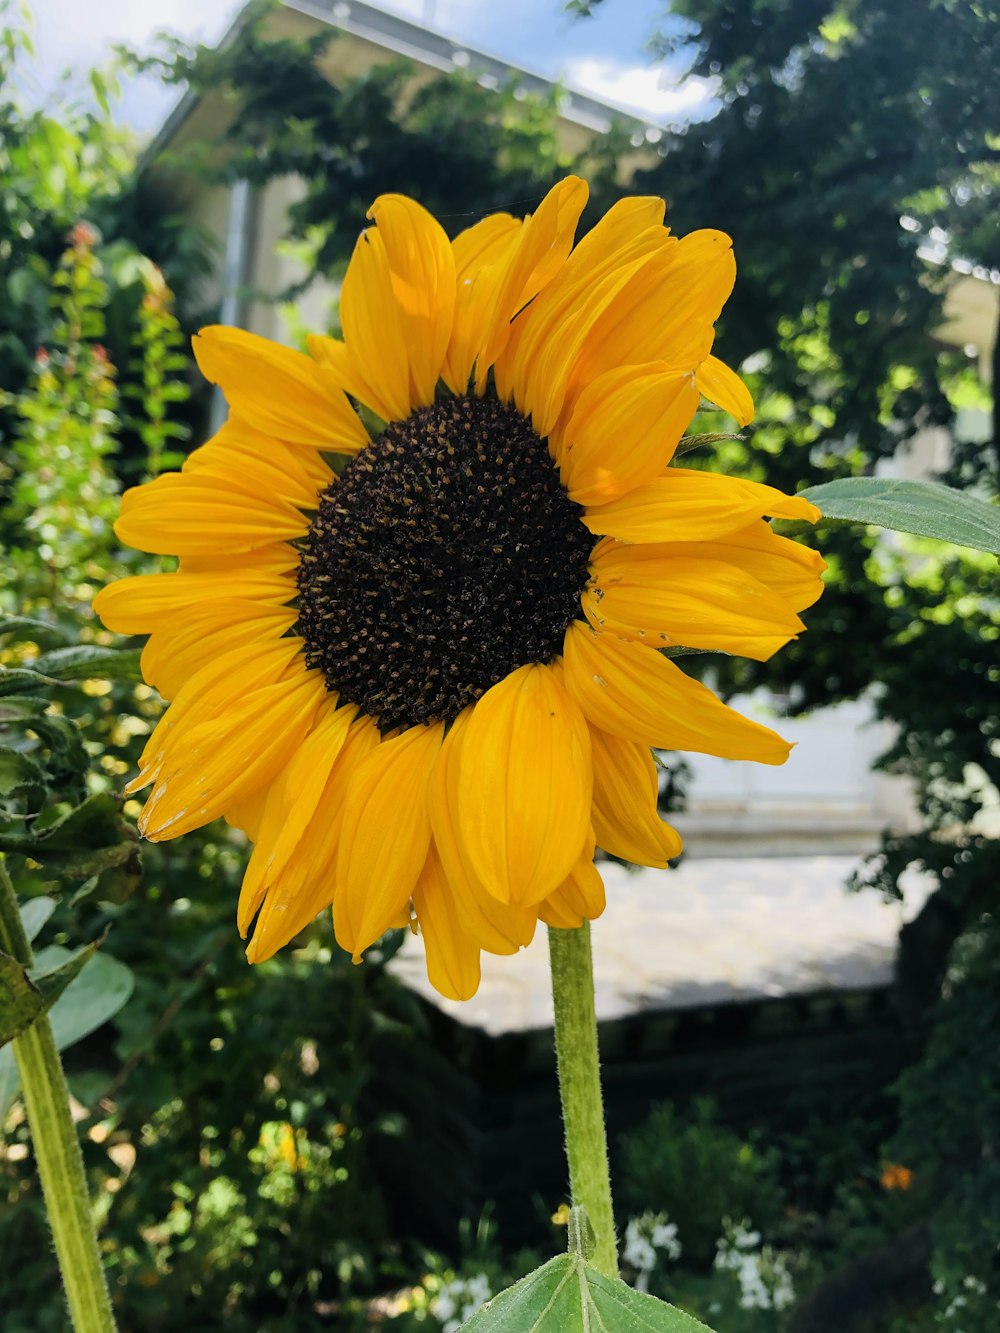 a sunflower in a garden with a house in the background